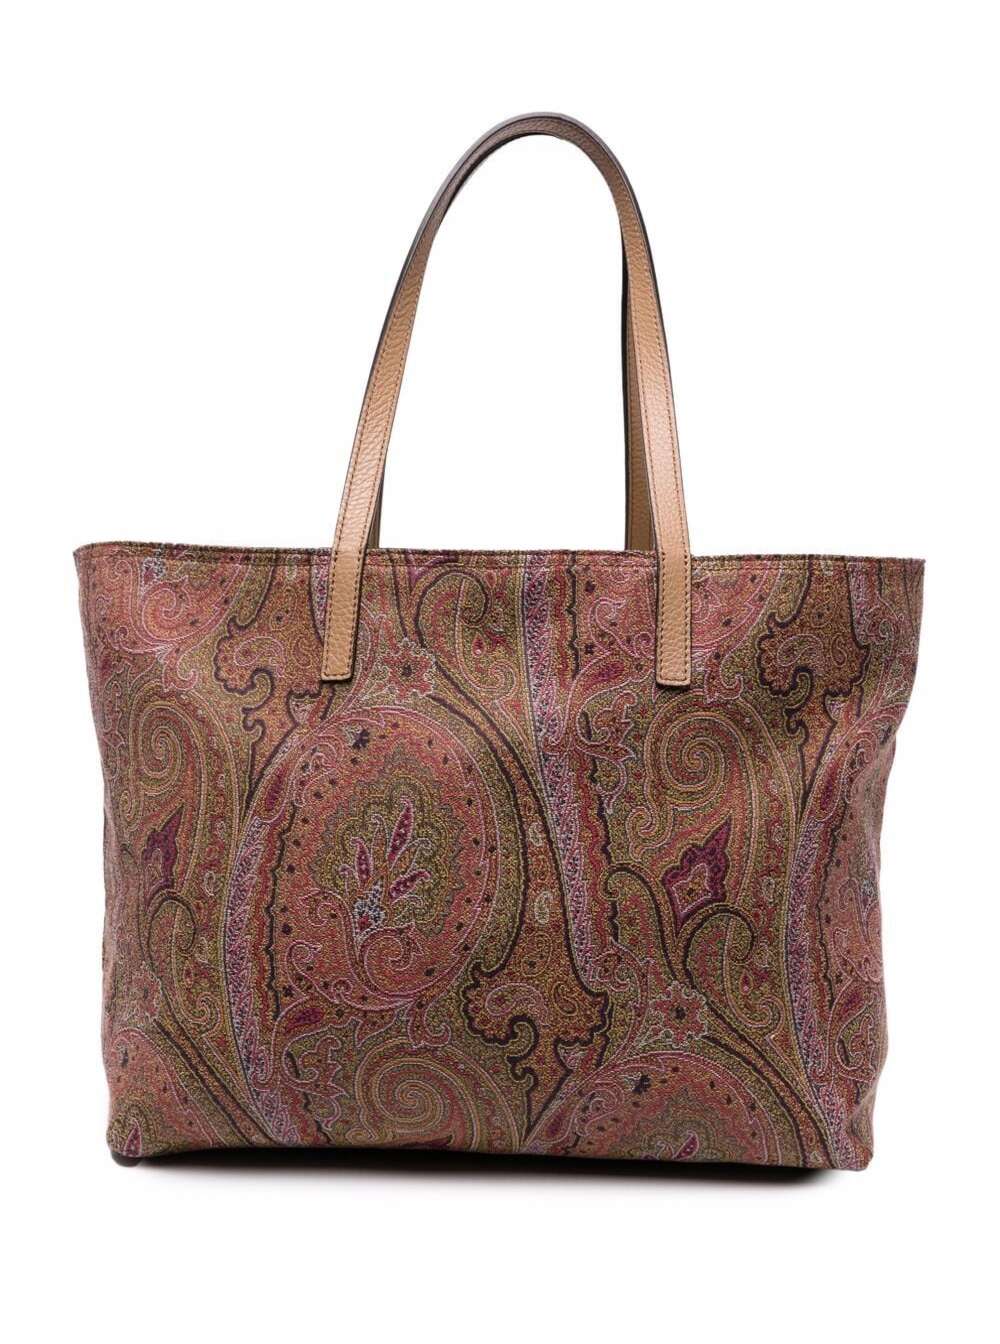 Etro Reversible Tote Leather Shoulder Bag With Paisley Print